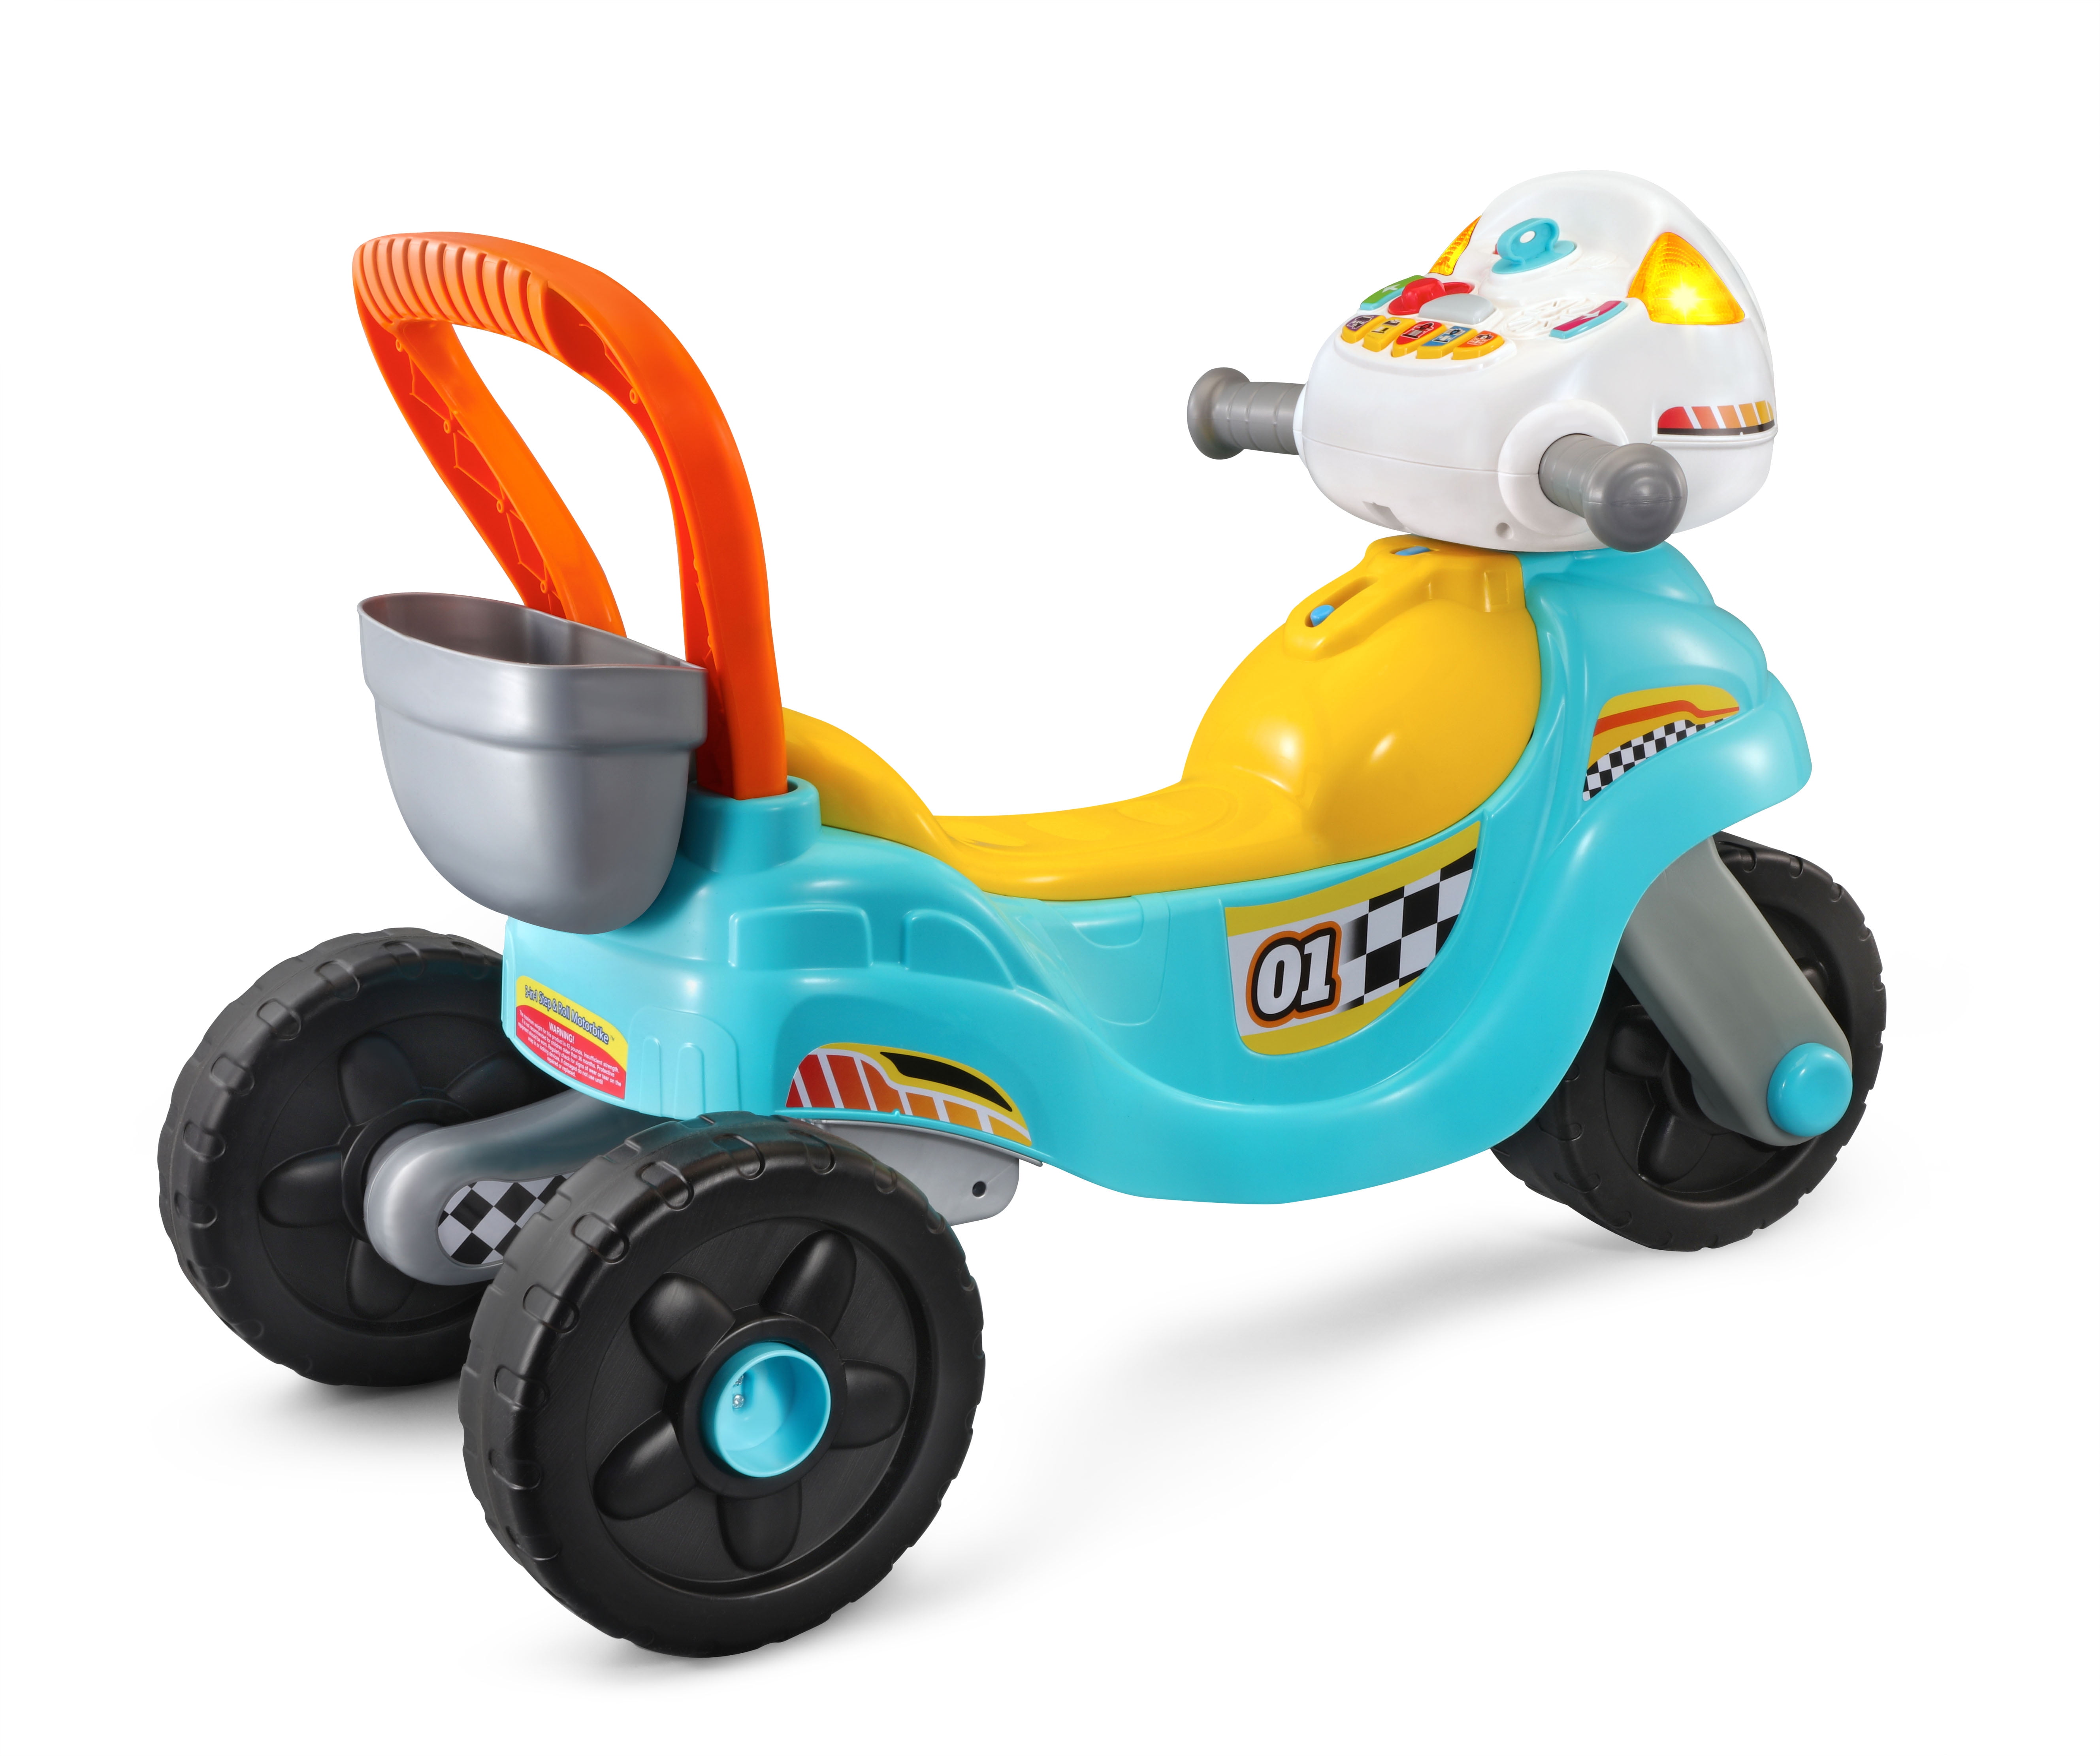 vtech ride on motorcycle